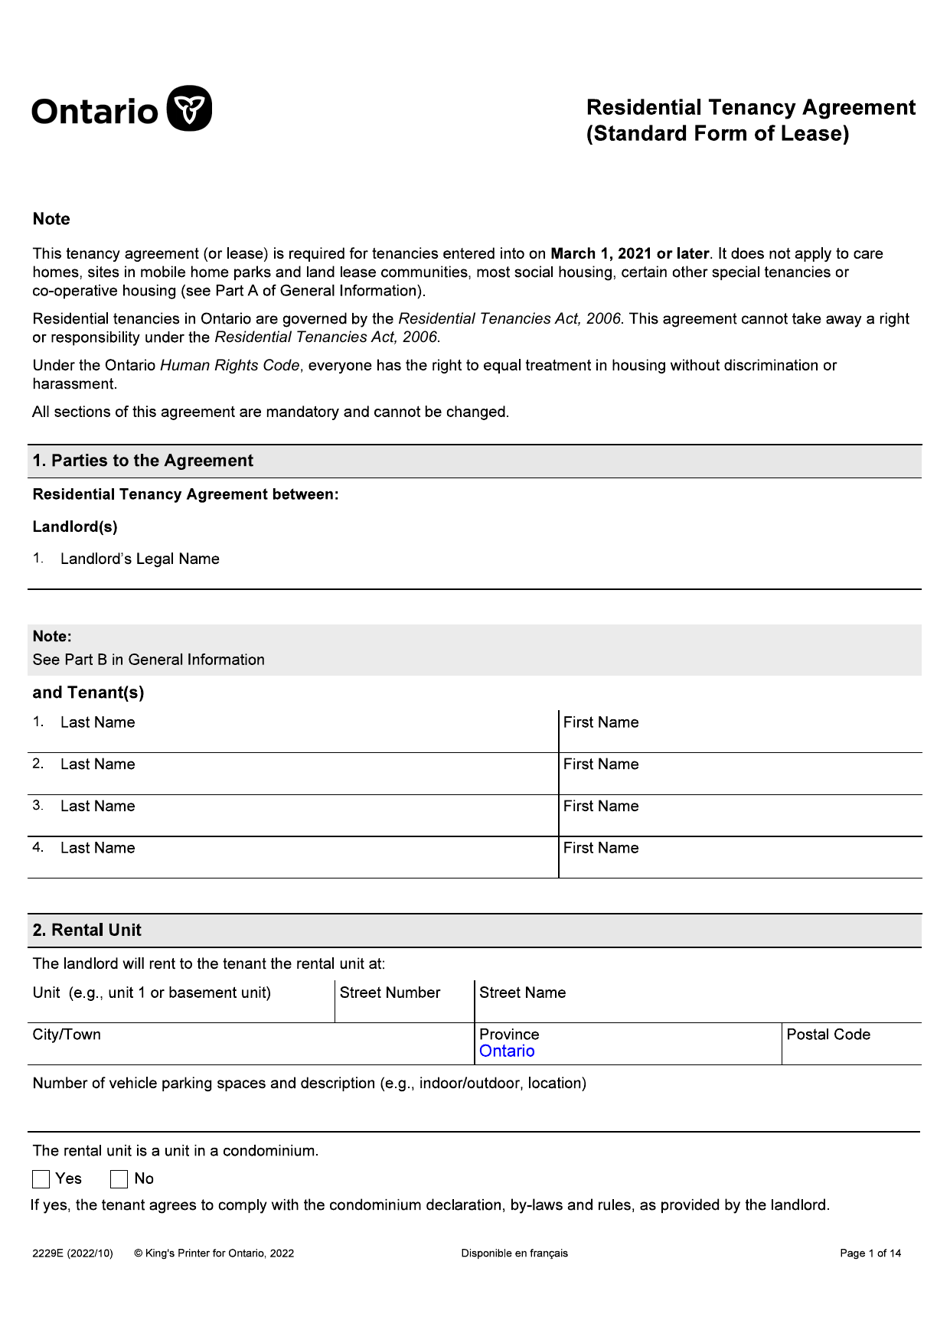 Form 2229E Residential Tenancy Agreement (Standard Form of Lease) - Ontario, Canada, Page 1